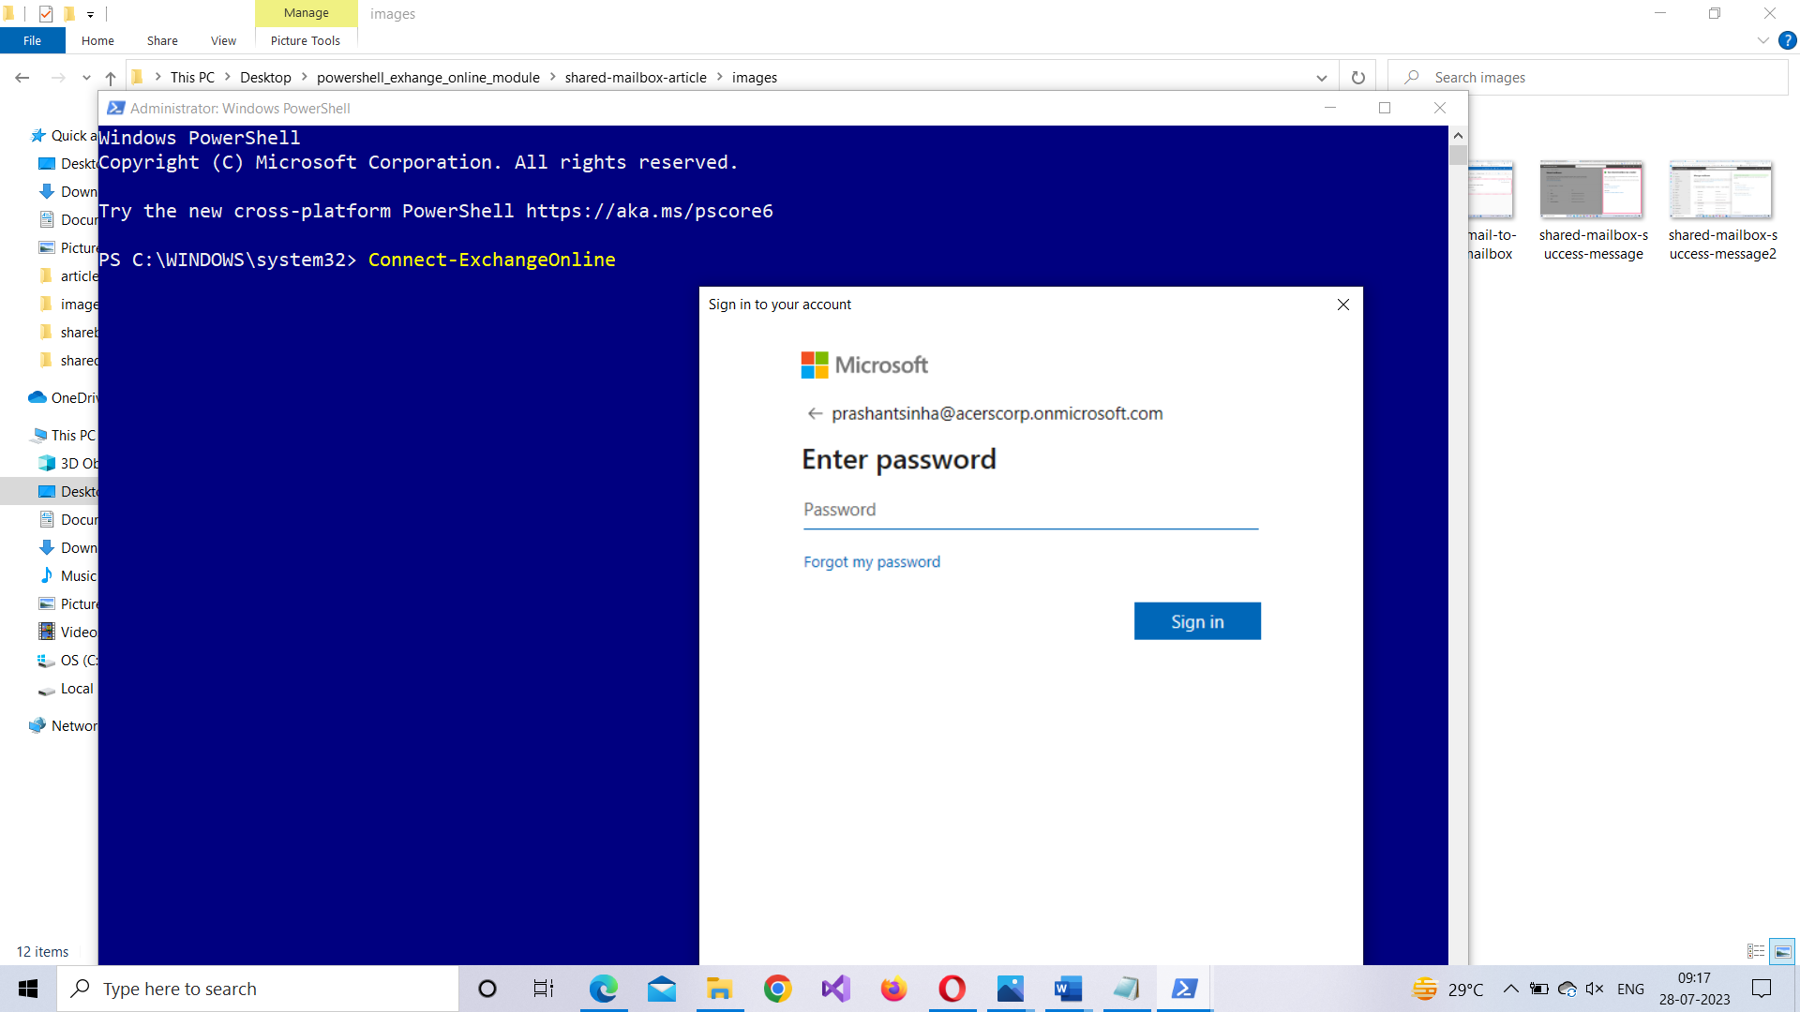 This screenshot shows how you can connect to Microsoft 365 exchange online using Windows PowerShell.